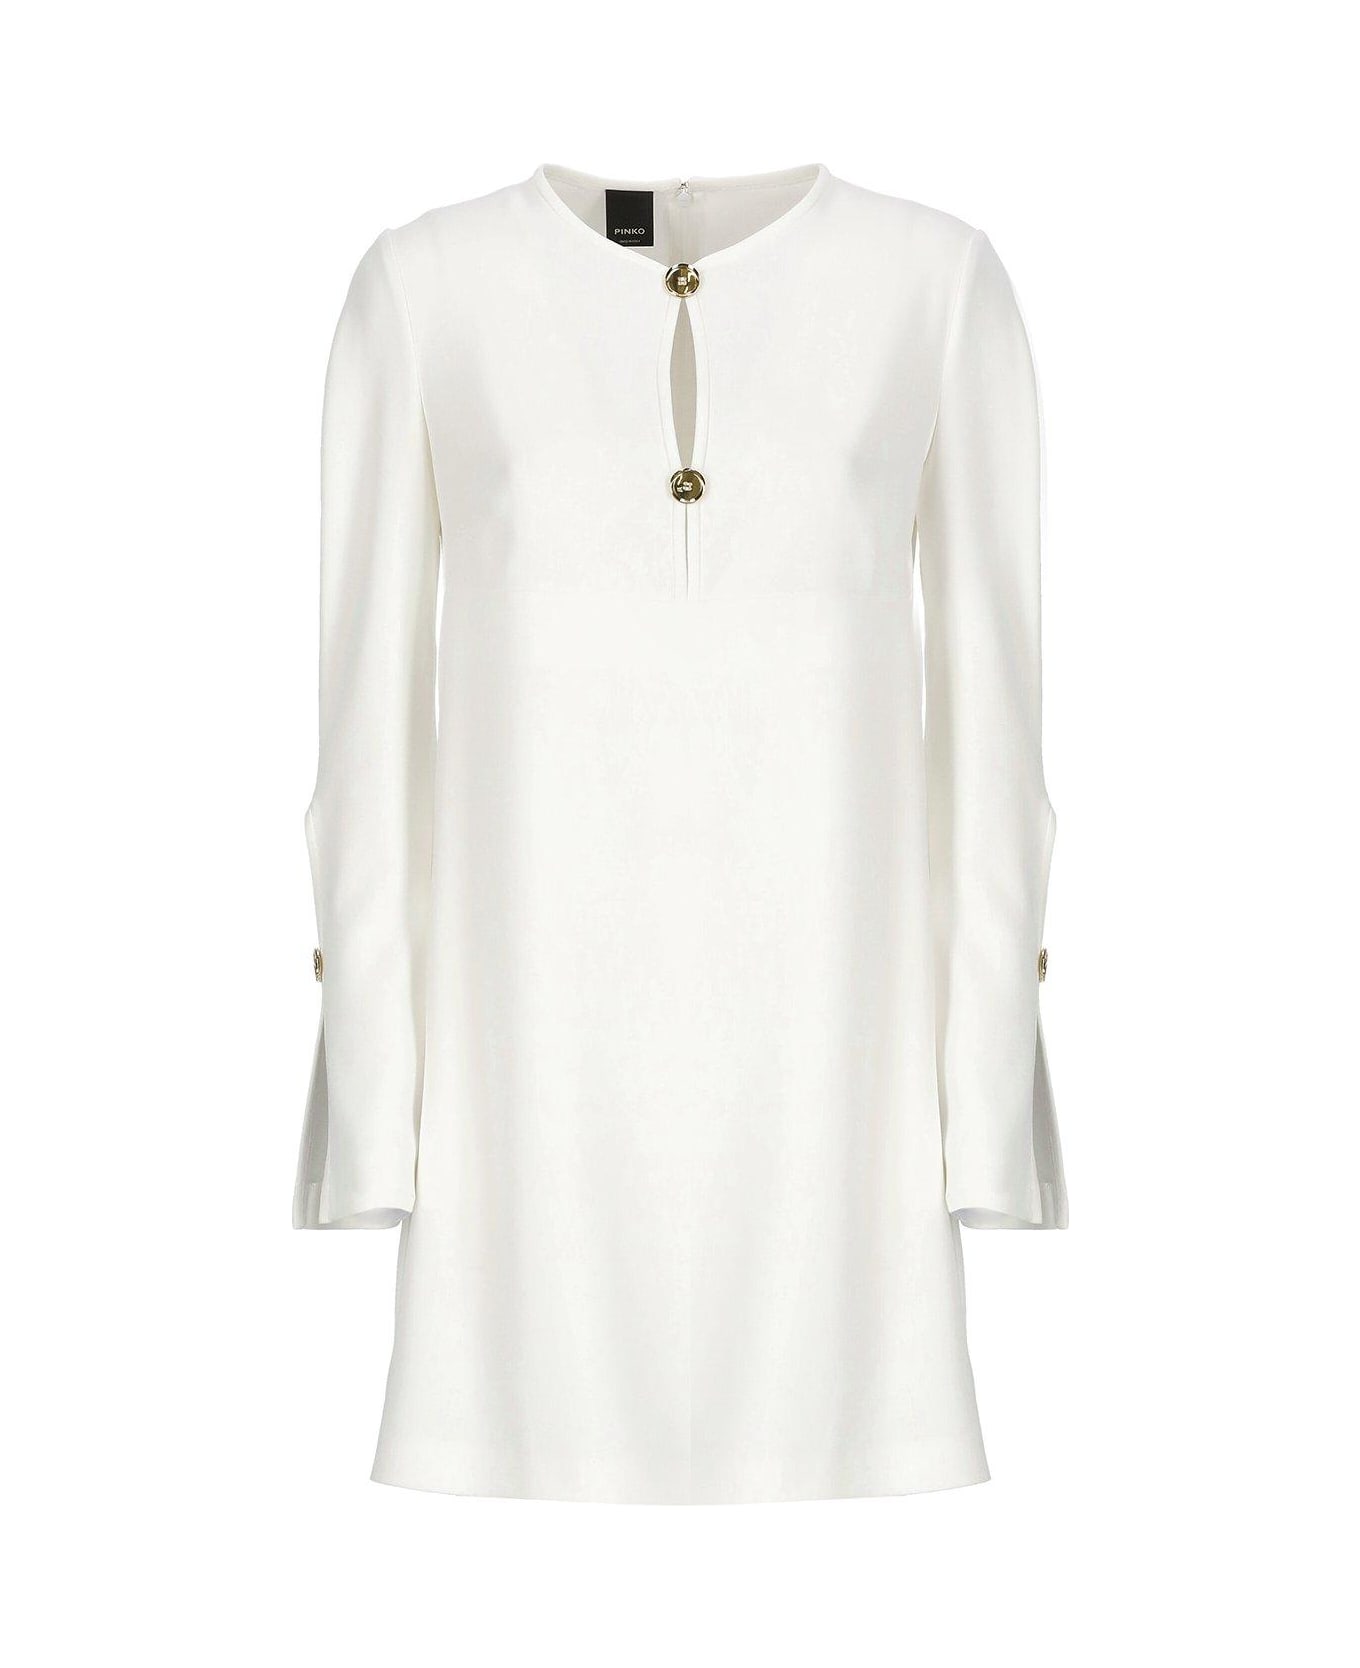 Pinko Cut-out Detailed Long-sleeved Dress - White ブラウス